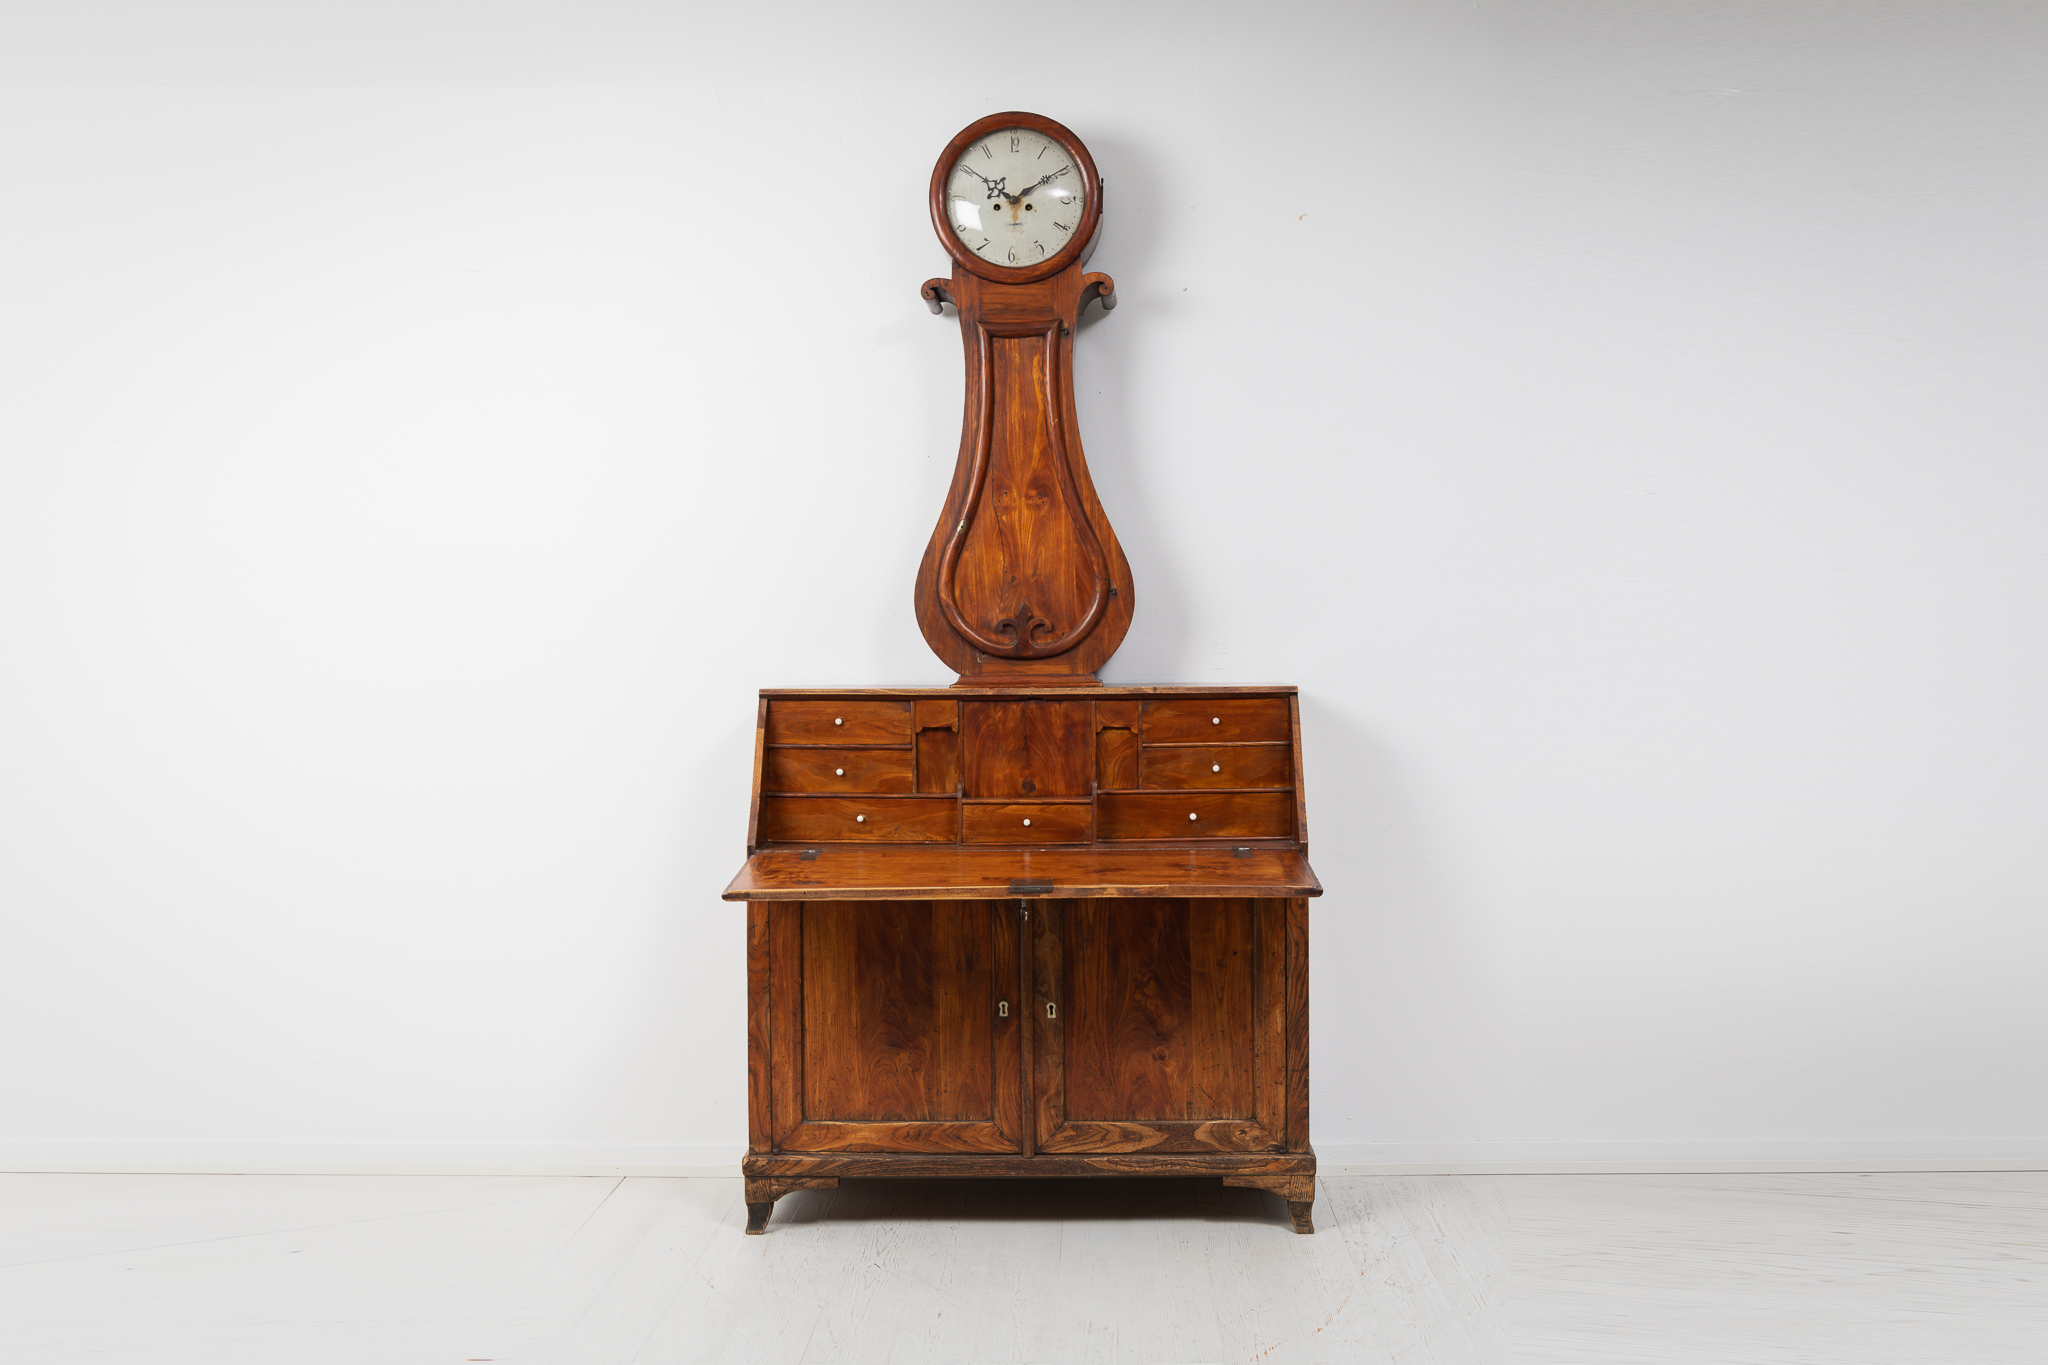 Swedish antique clock cabinet made during the early to mid 1800s, circa 1820 to 1840. The cabinet is veneered and waxed elm.